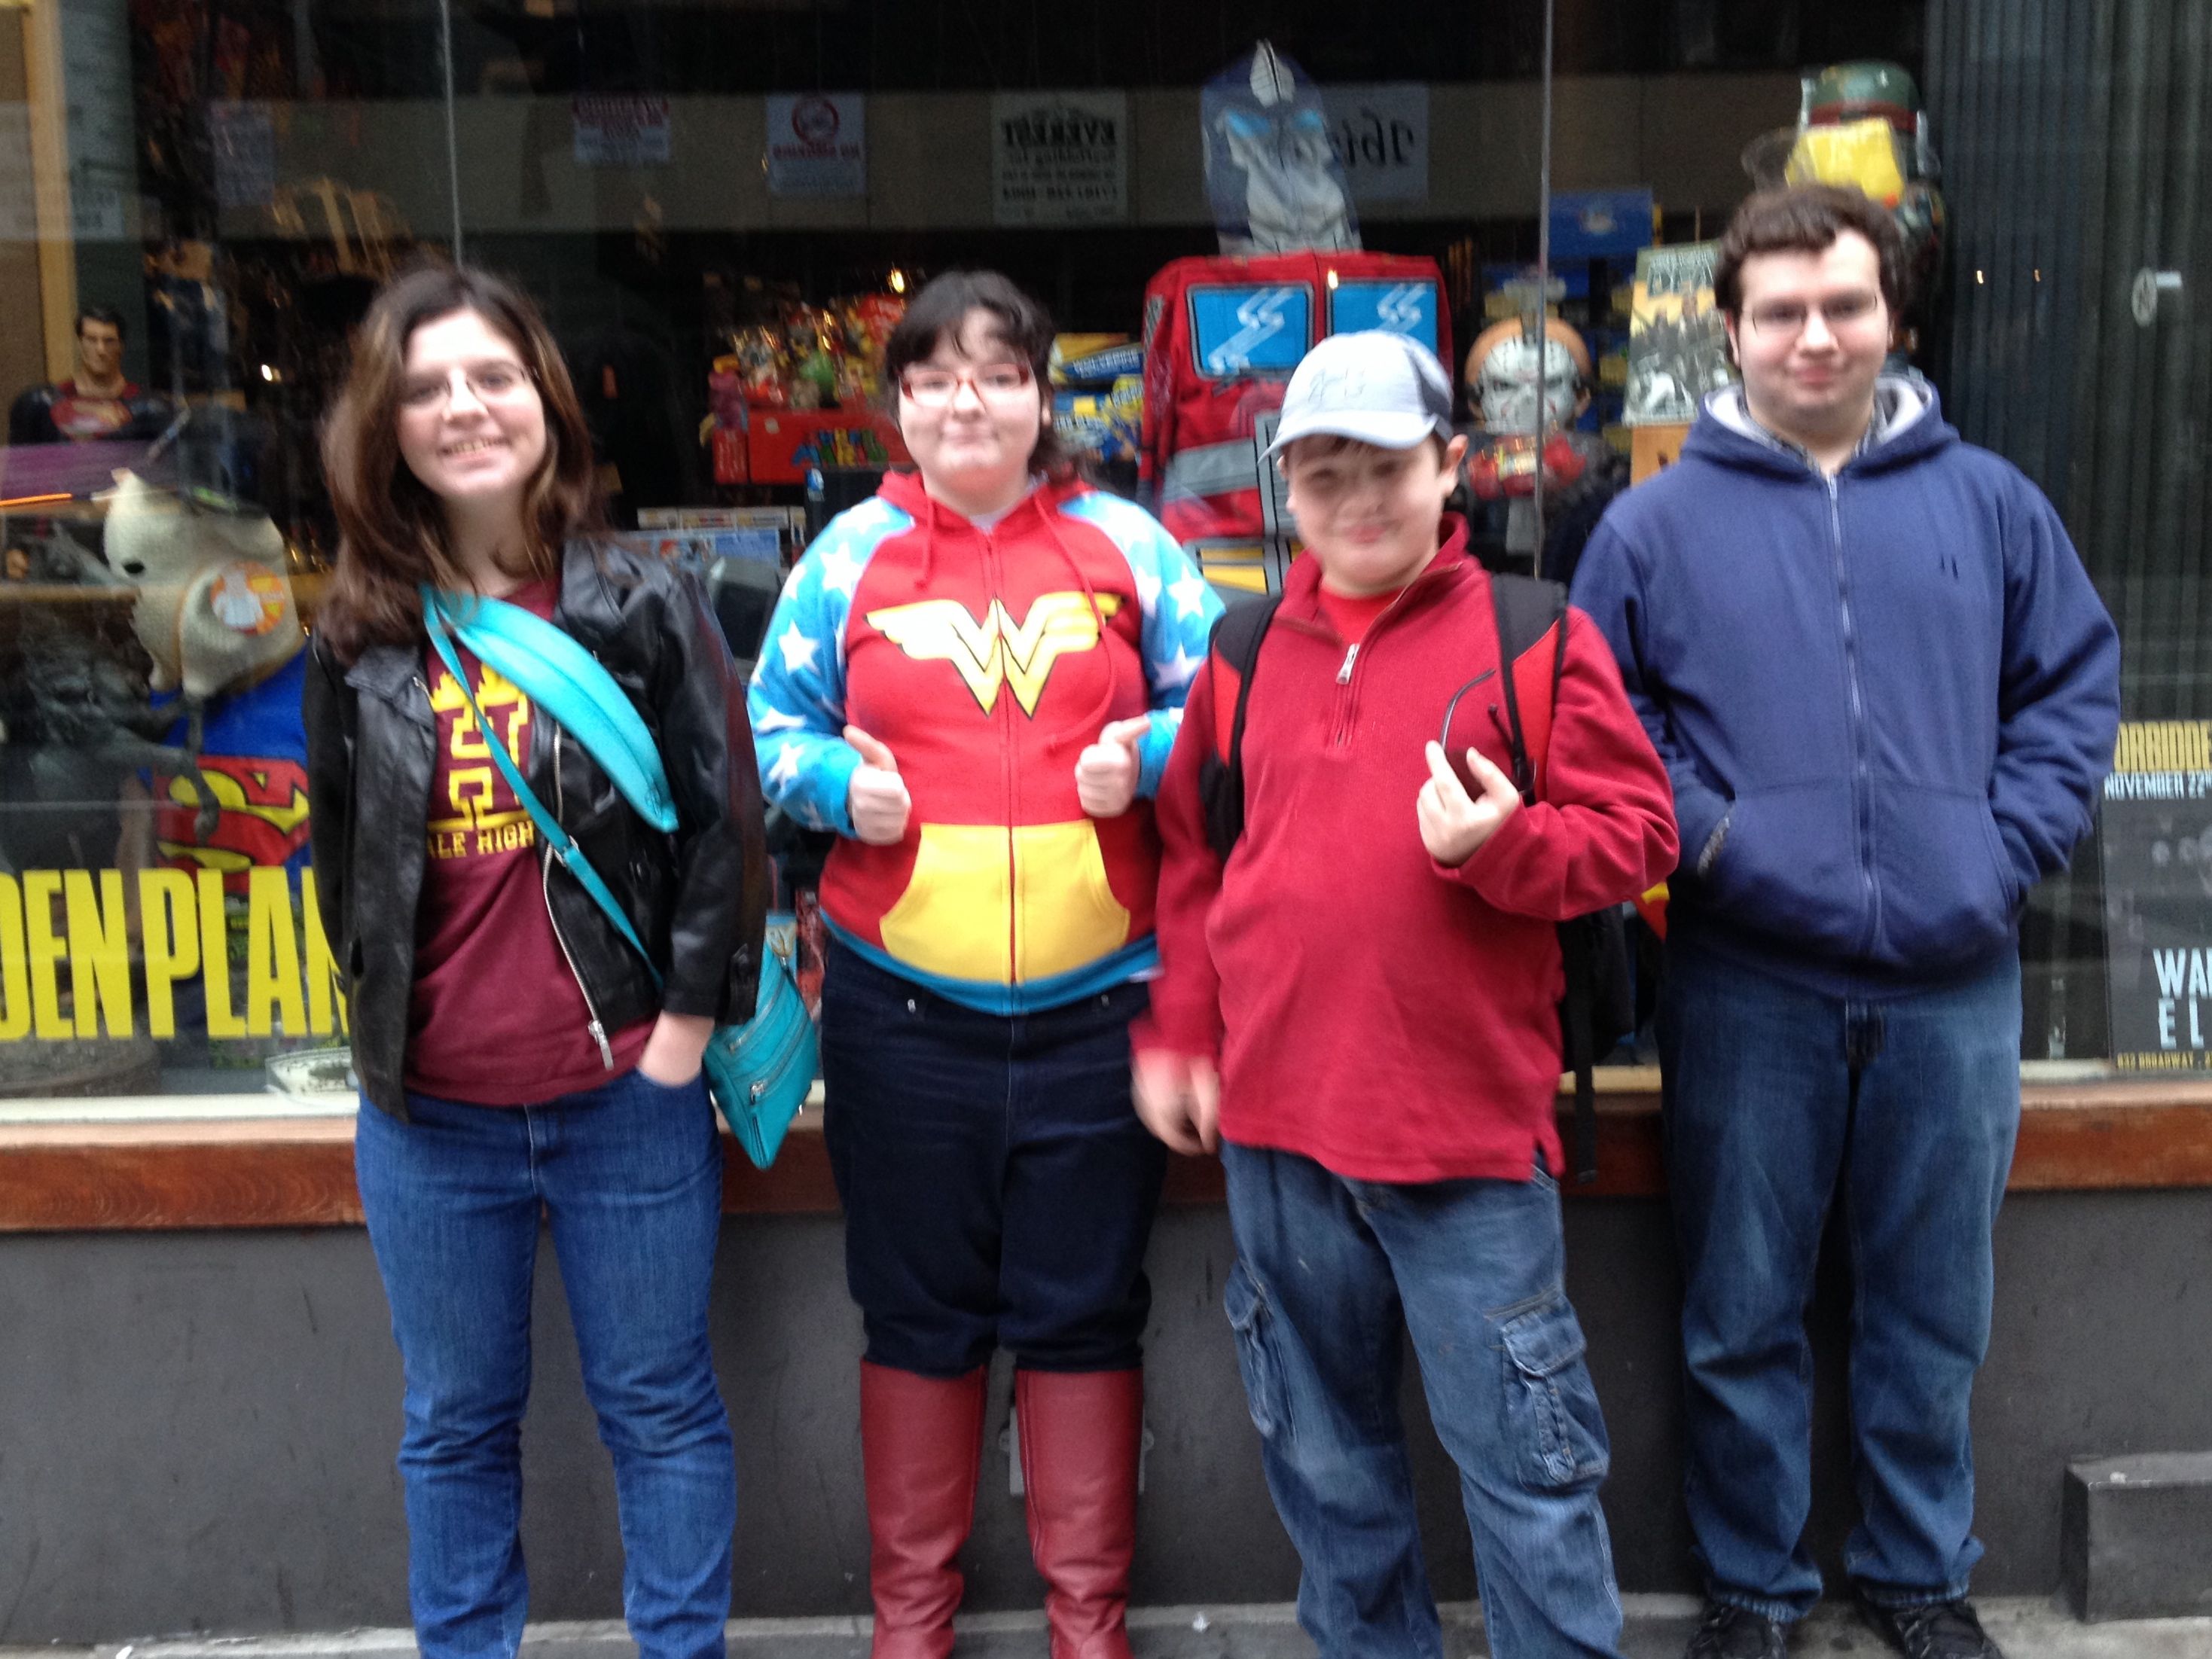 The geek crew of Corrina Lawson outside Forbidden Planet in New York City in November, just before filming the NickMom segment.